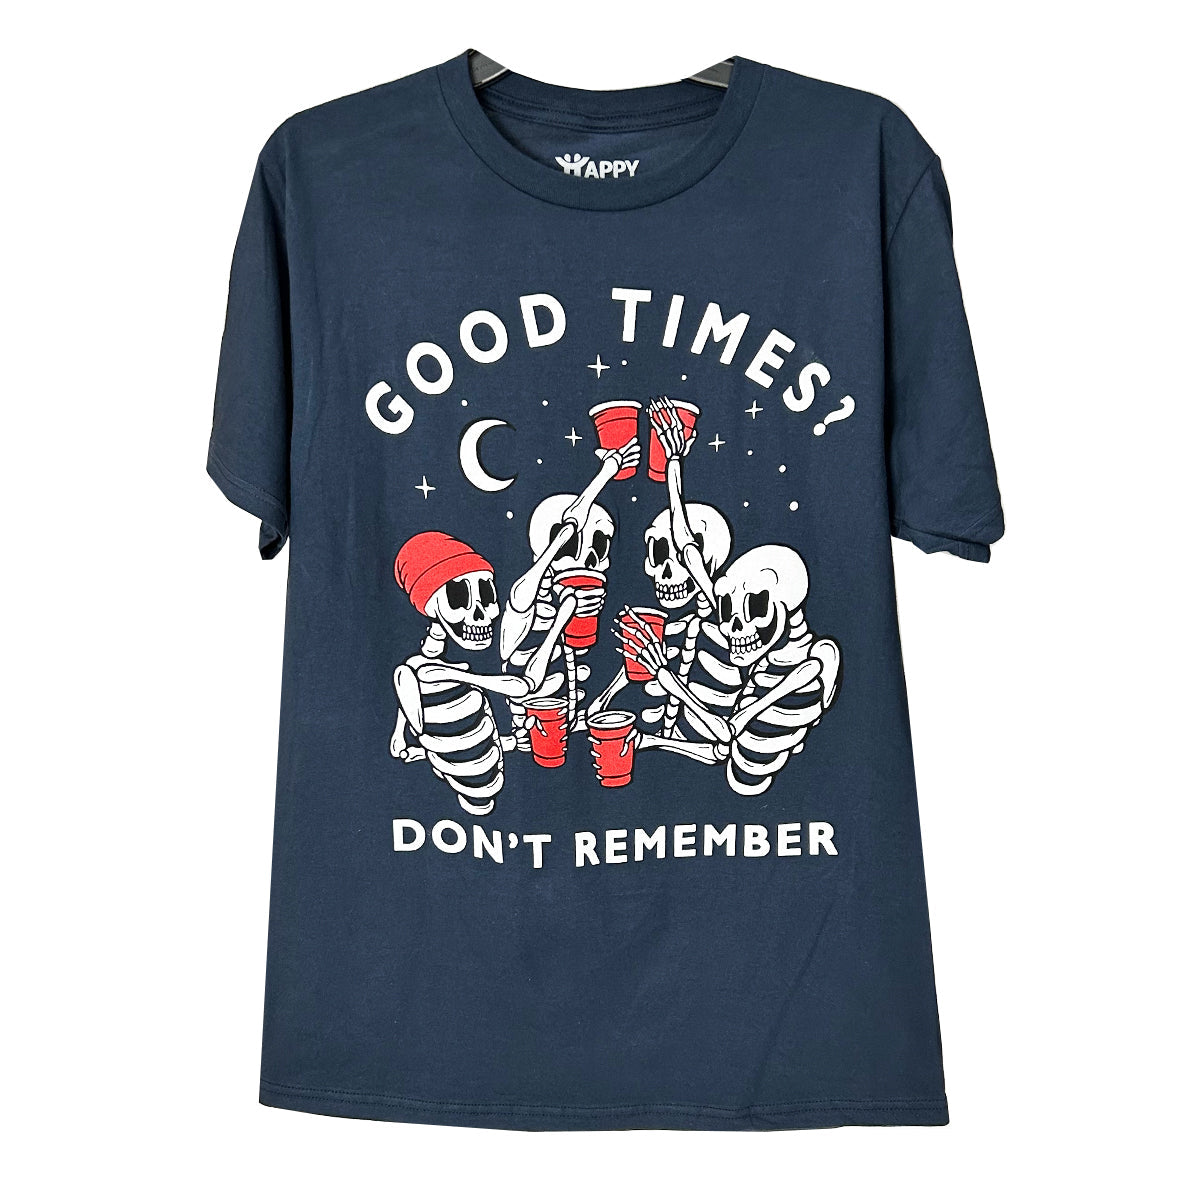 Good Times Don't Remember - Pack of 6 Units  1S, 2M, 2L, 1XL